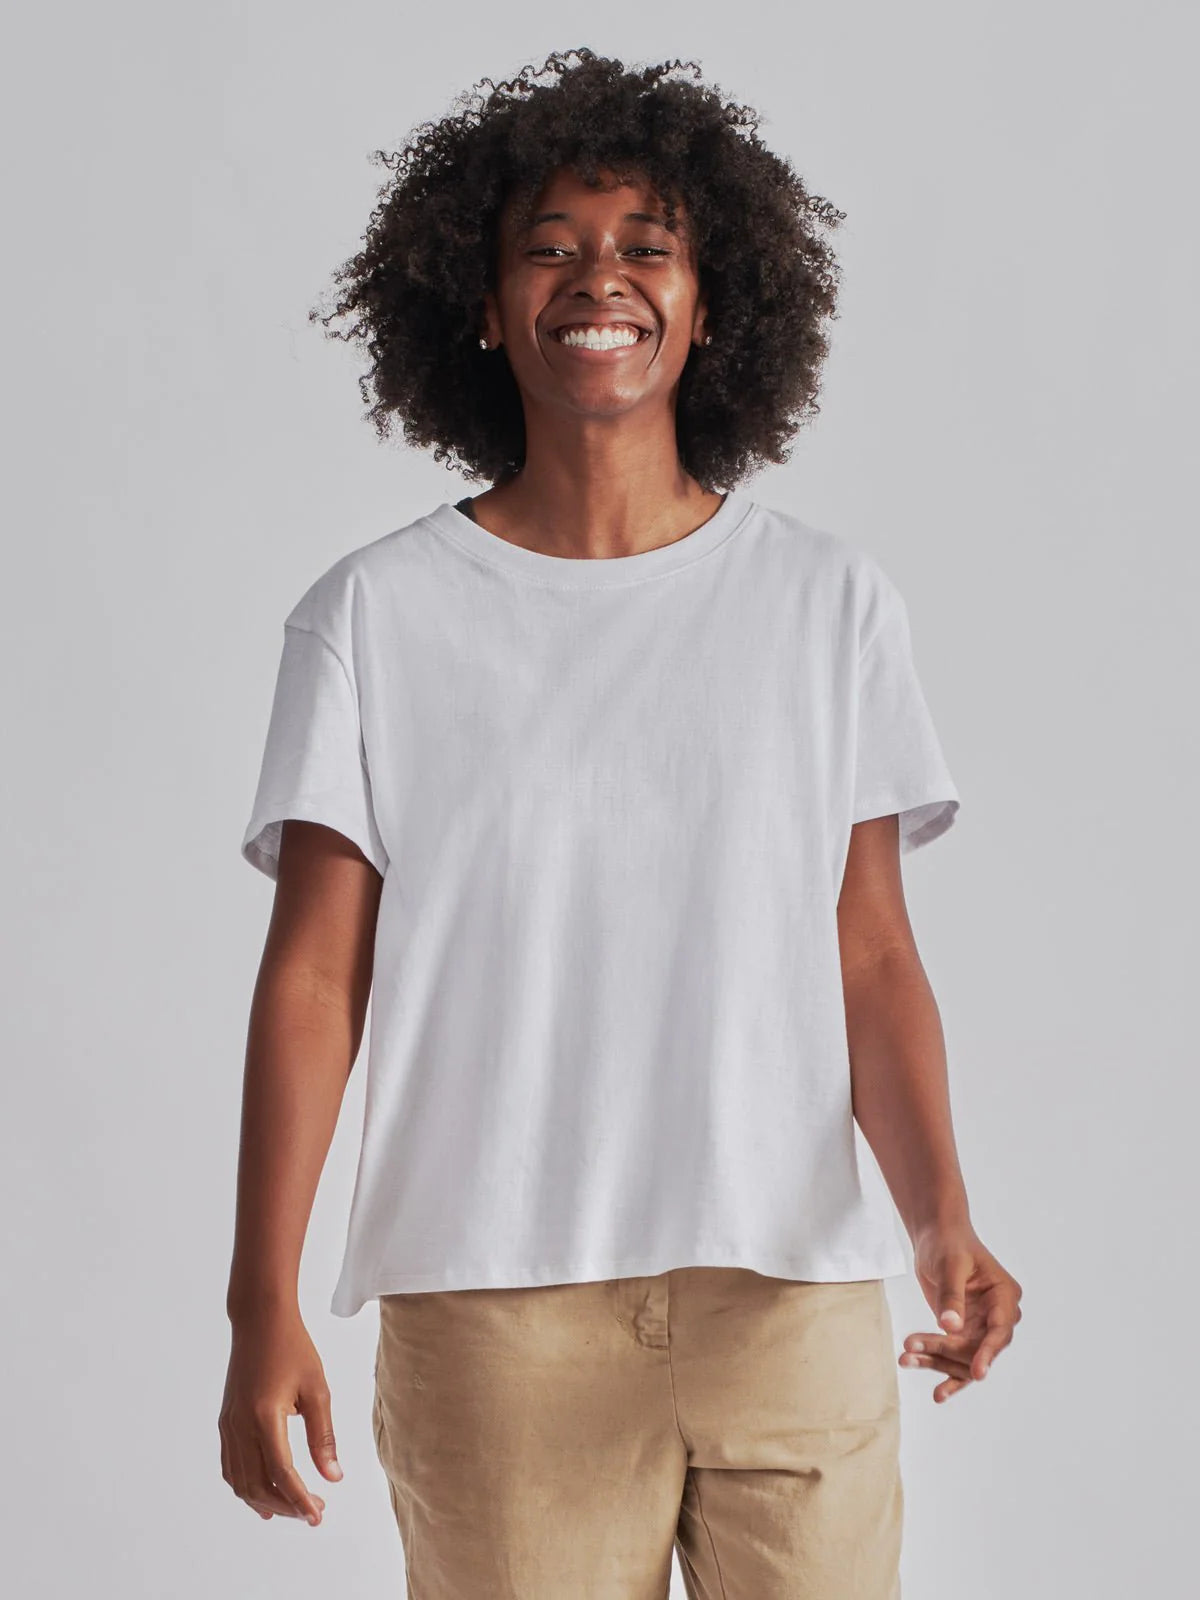 Customizable Everywhere Apparel Women's Recycled Cotton T-Shirt in white